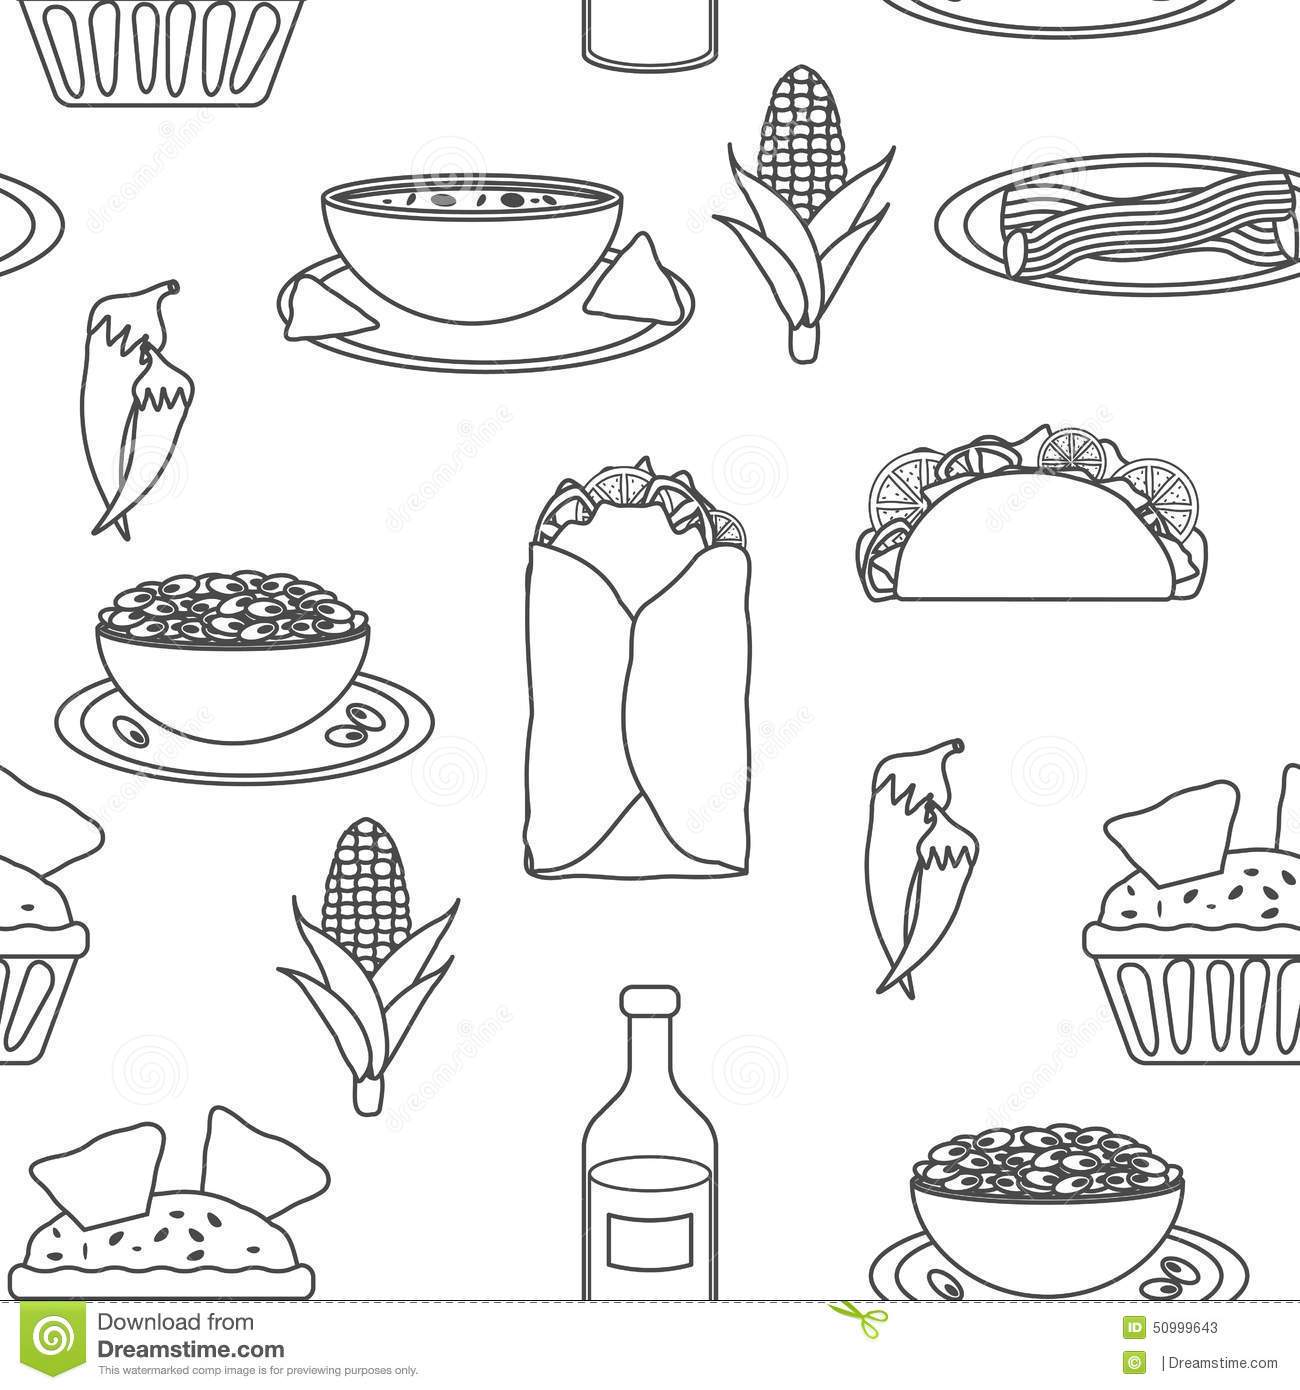 Mexican food clipart.